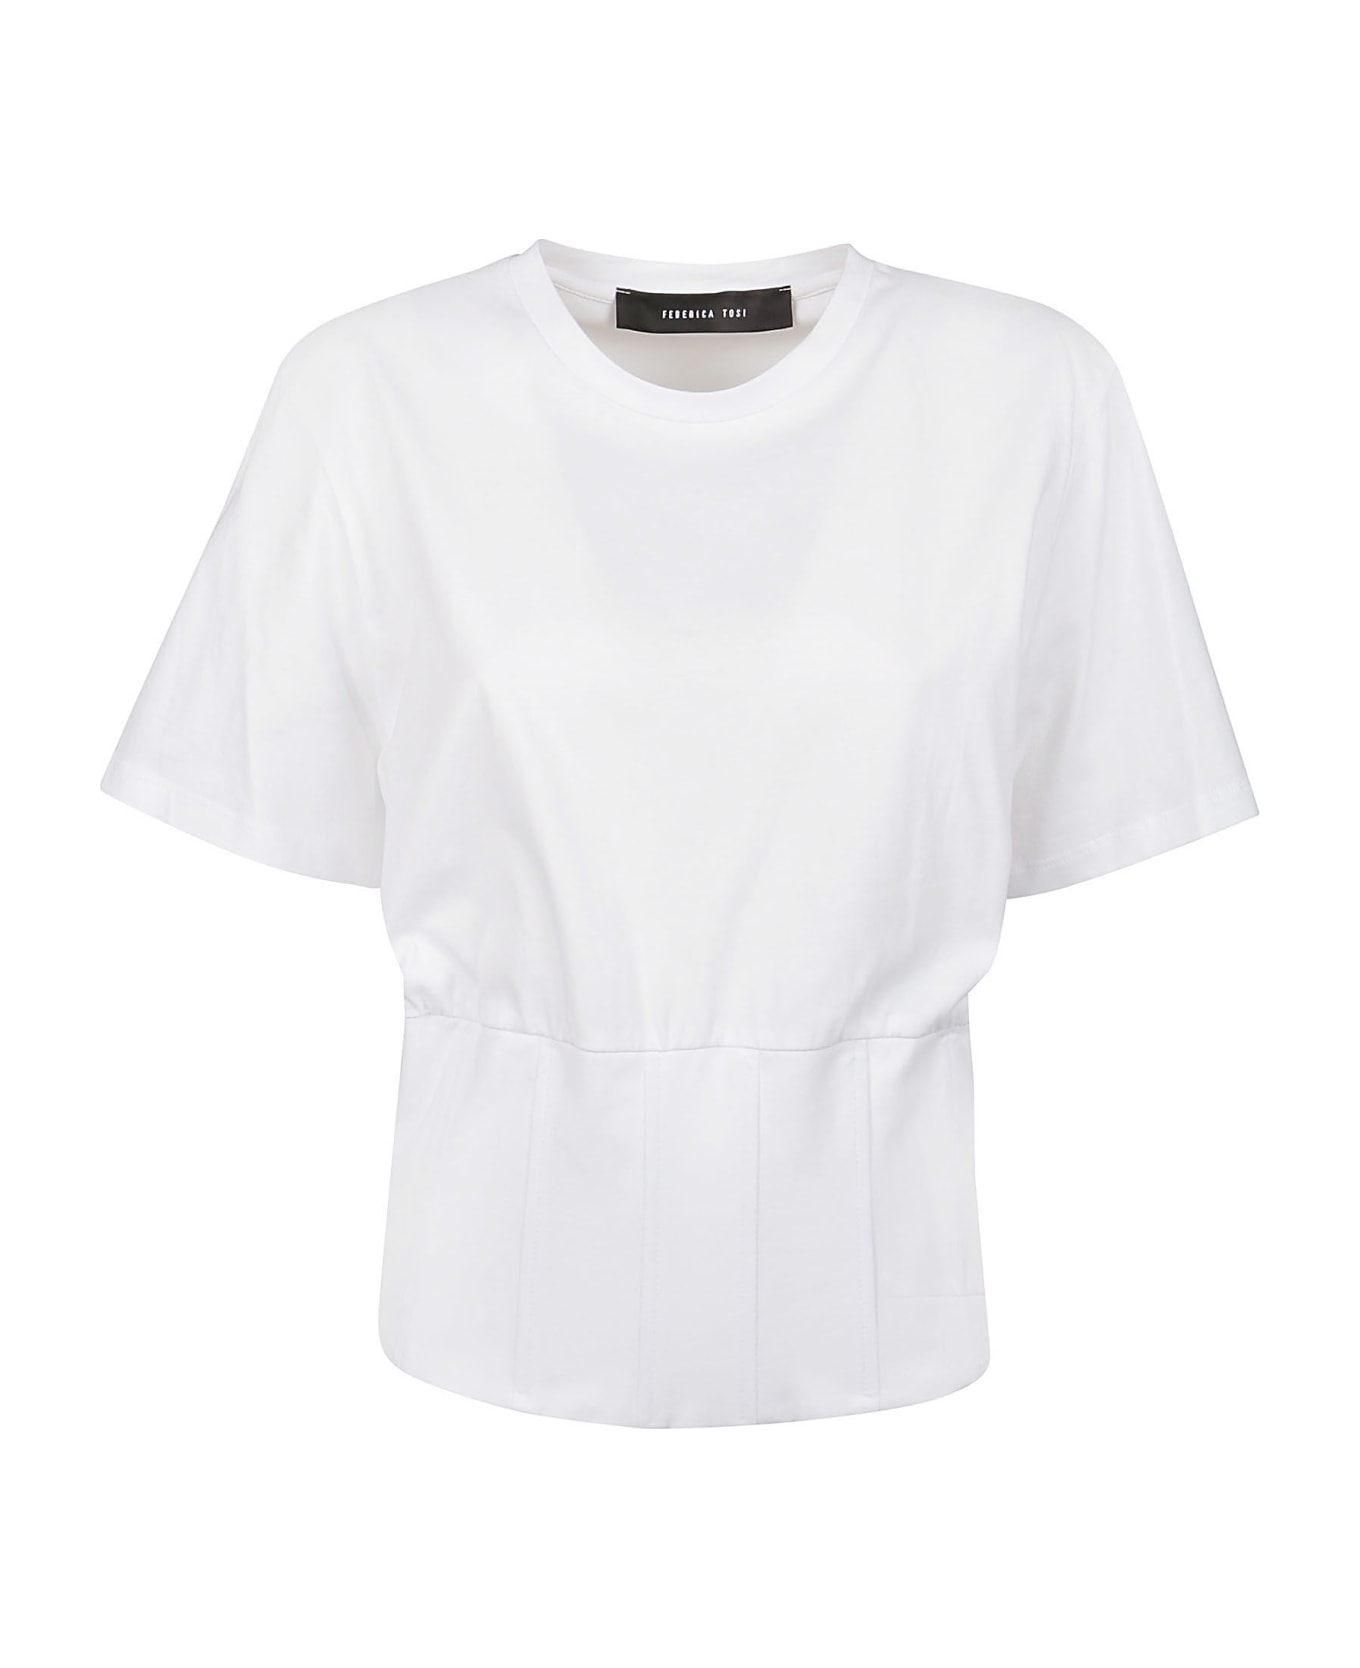 Federica Tosi Pannelled T-shirt - Bianco